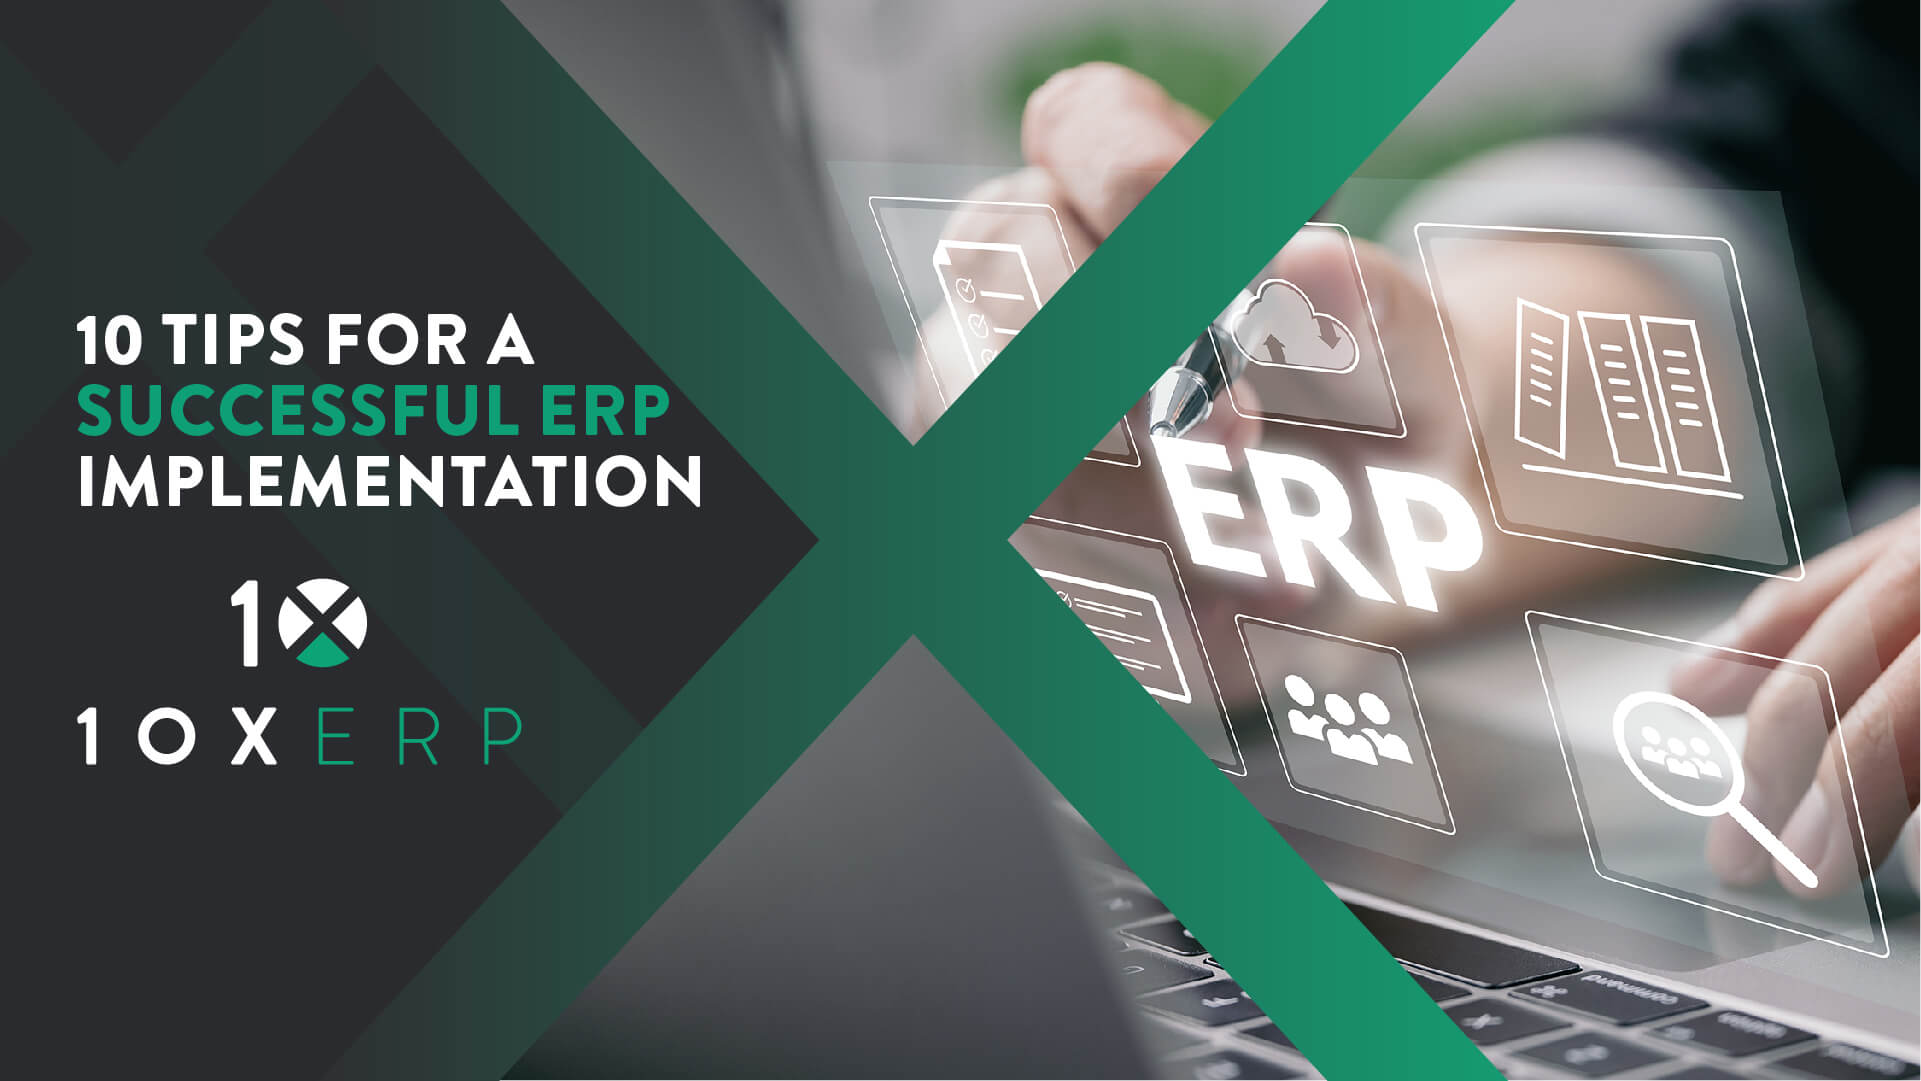 10 Tips for a Successful ERP Implementation featured image